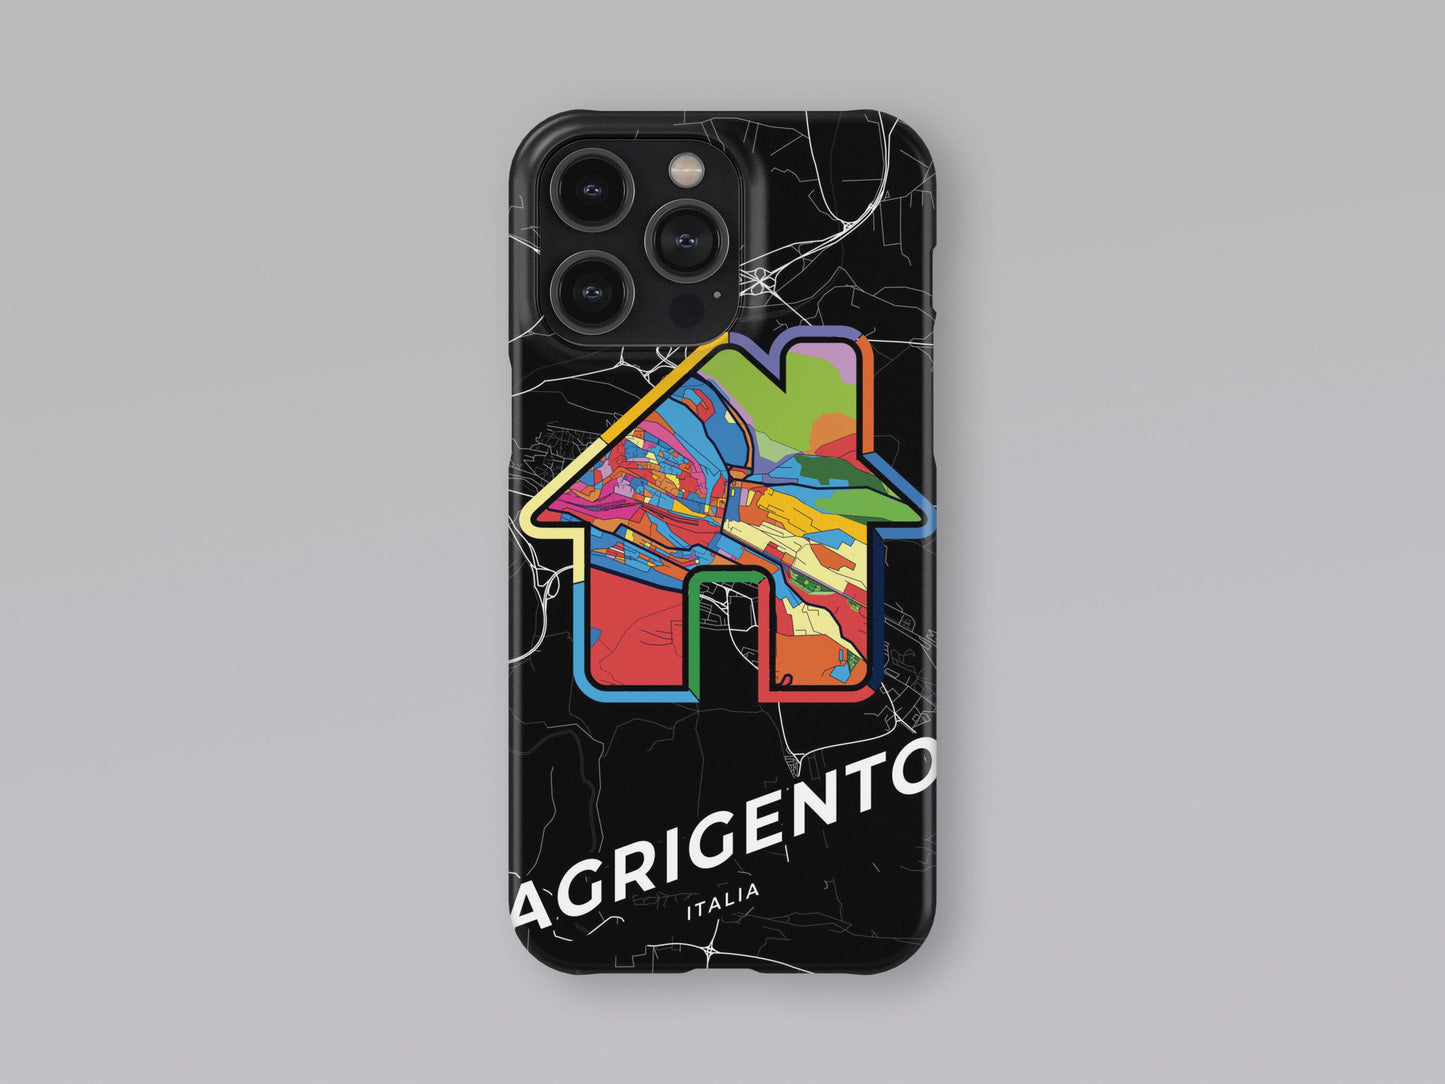 Agrigento Italy slim phone case with colorful icon. Birthday, wedding or housewarming gift. Couple match cases. 3